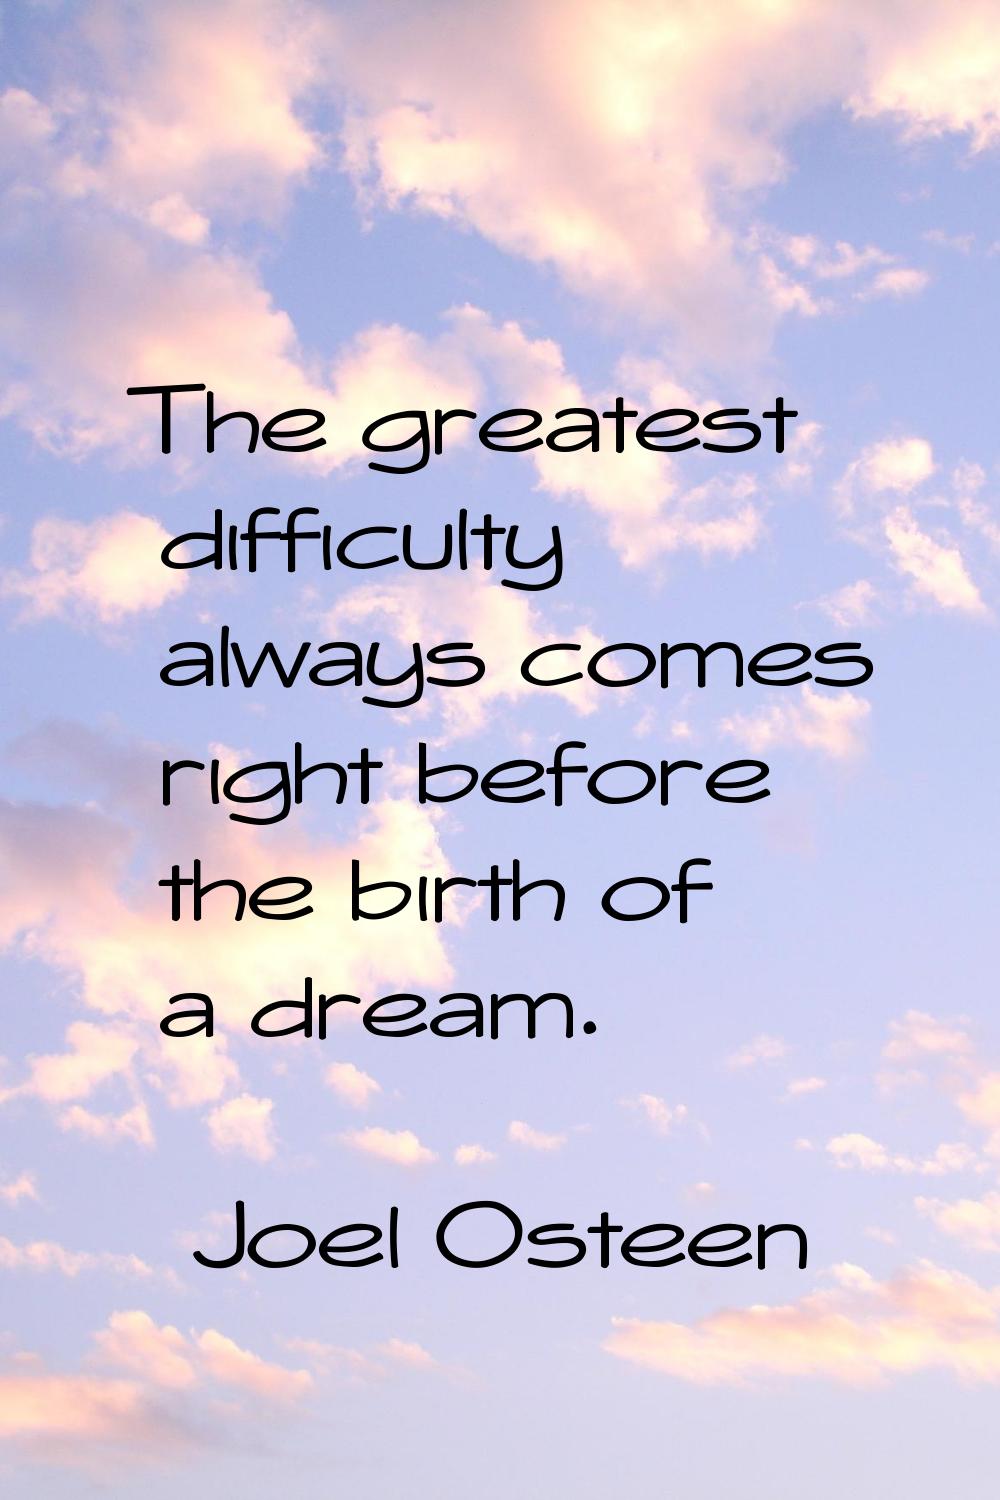 The greatest difficulty always comes right before the birth of a dream.